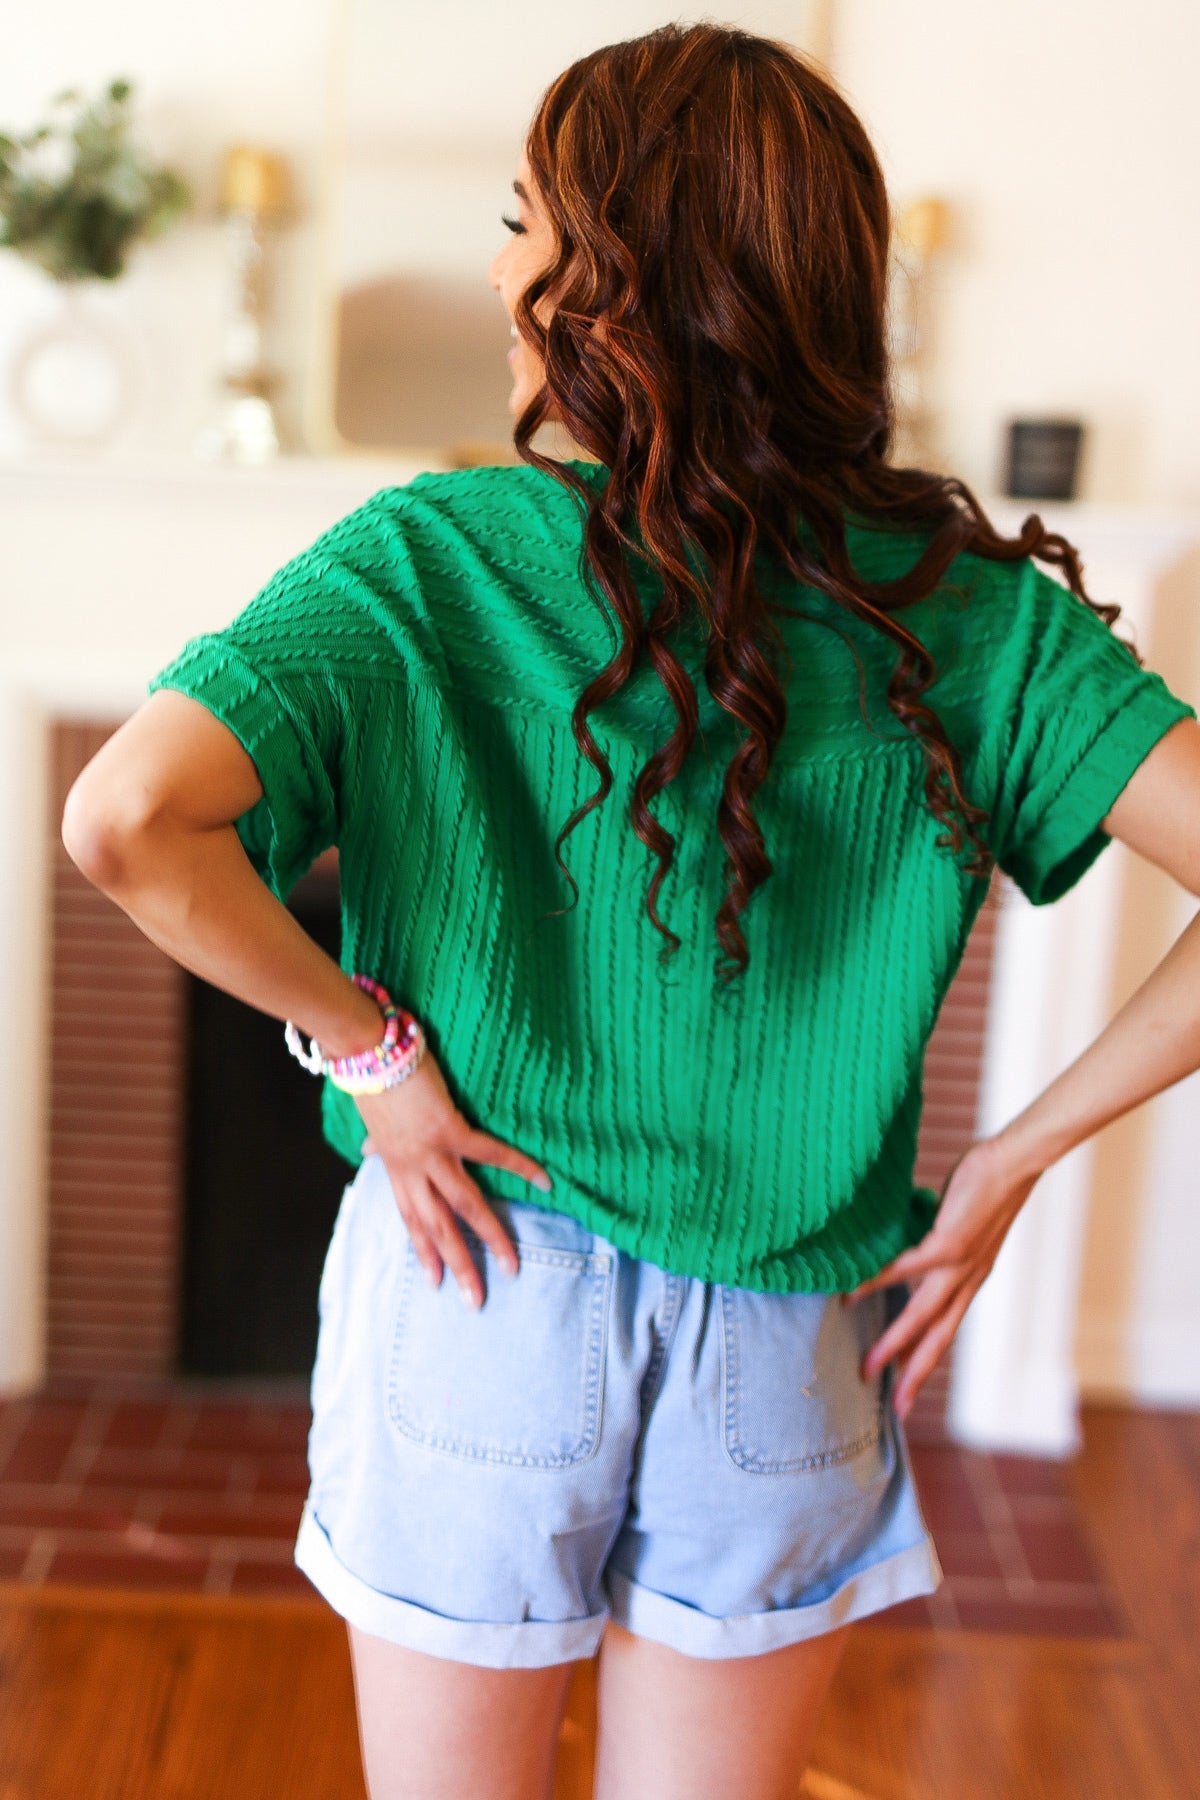 Be Your Best Green Cable Knit Dolman Short Sleeve Sweater Top Haptics